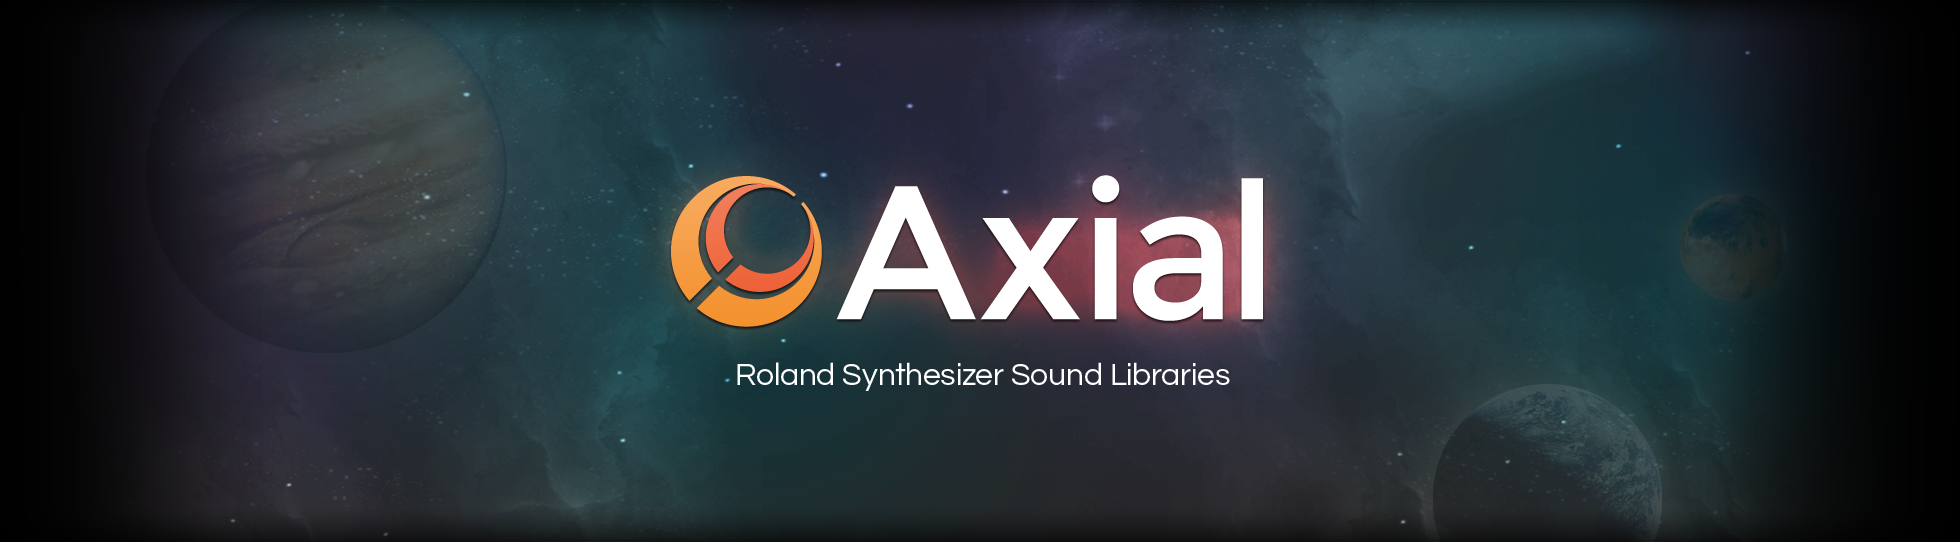 Synthesizer Sound Libraries